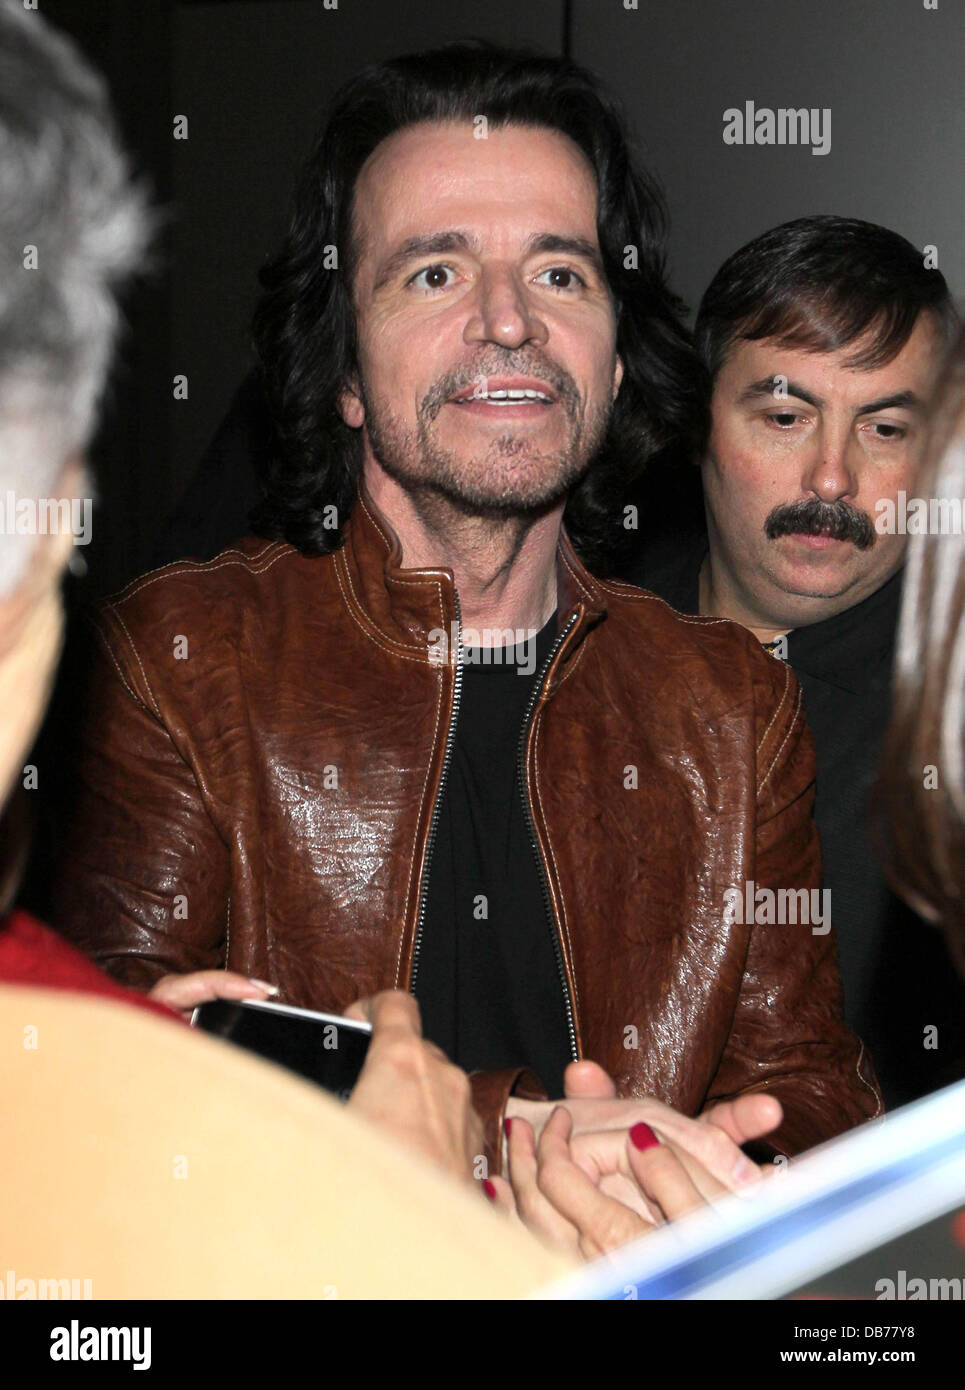 Yanni meets and greets fans outside the Nokia Center after his performance Los Angeles, California - 08.05.11 Stock Photo